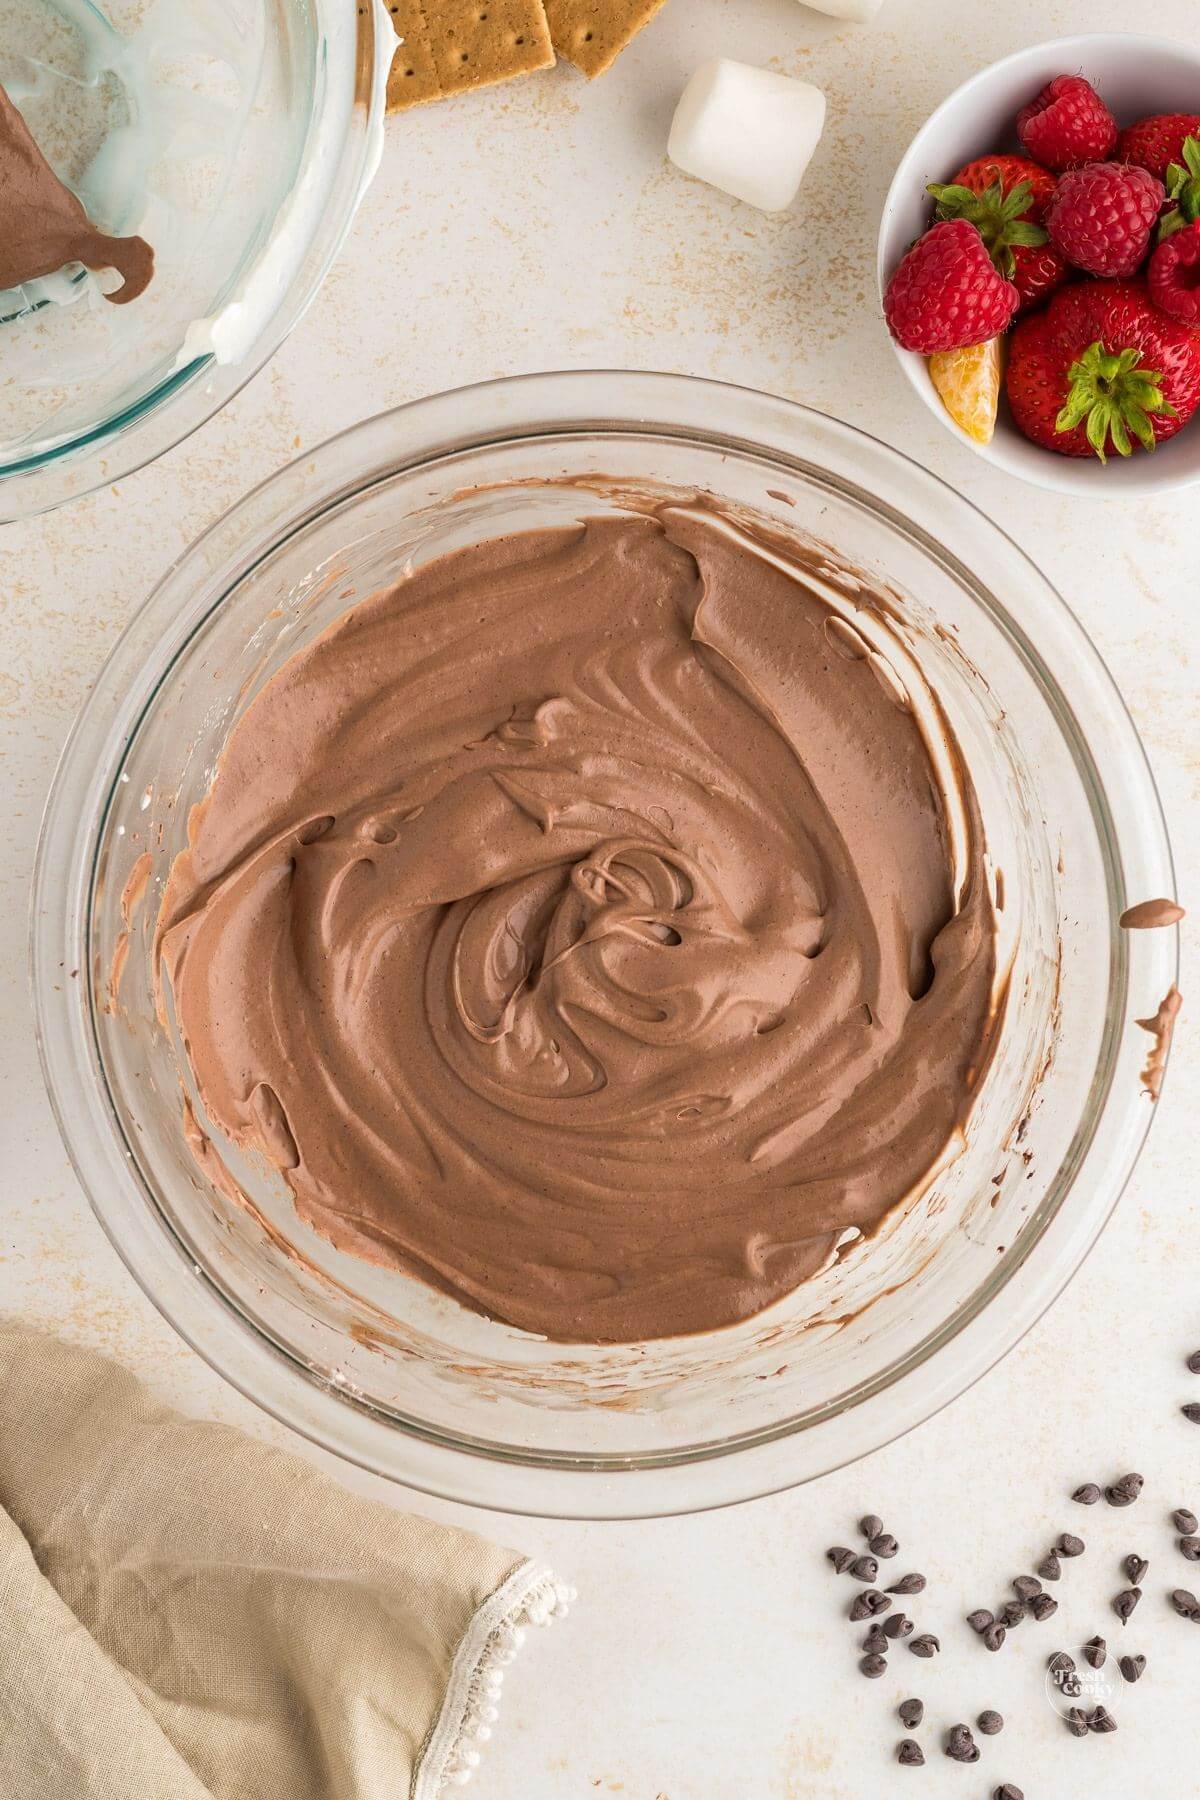 Cream cheese and cocoa mixture combined with whipped cream in a bowl.